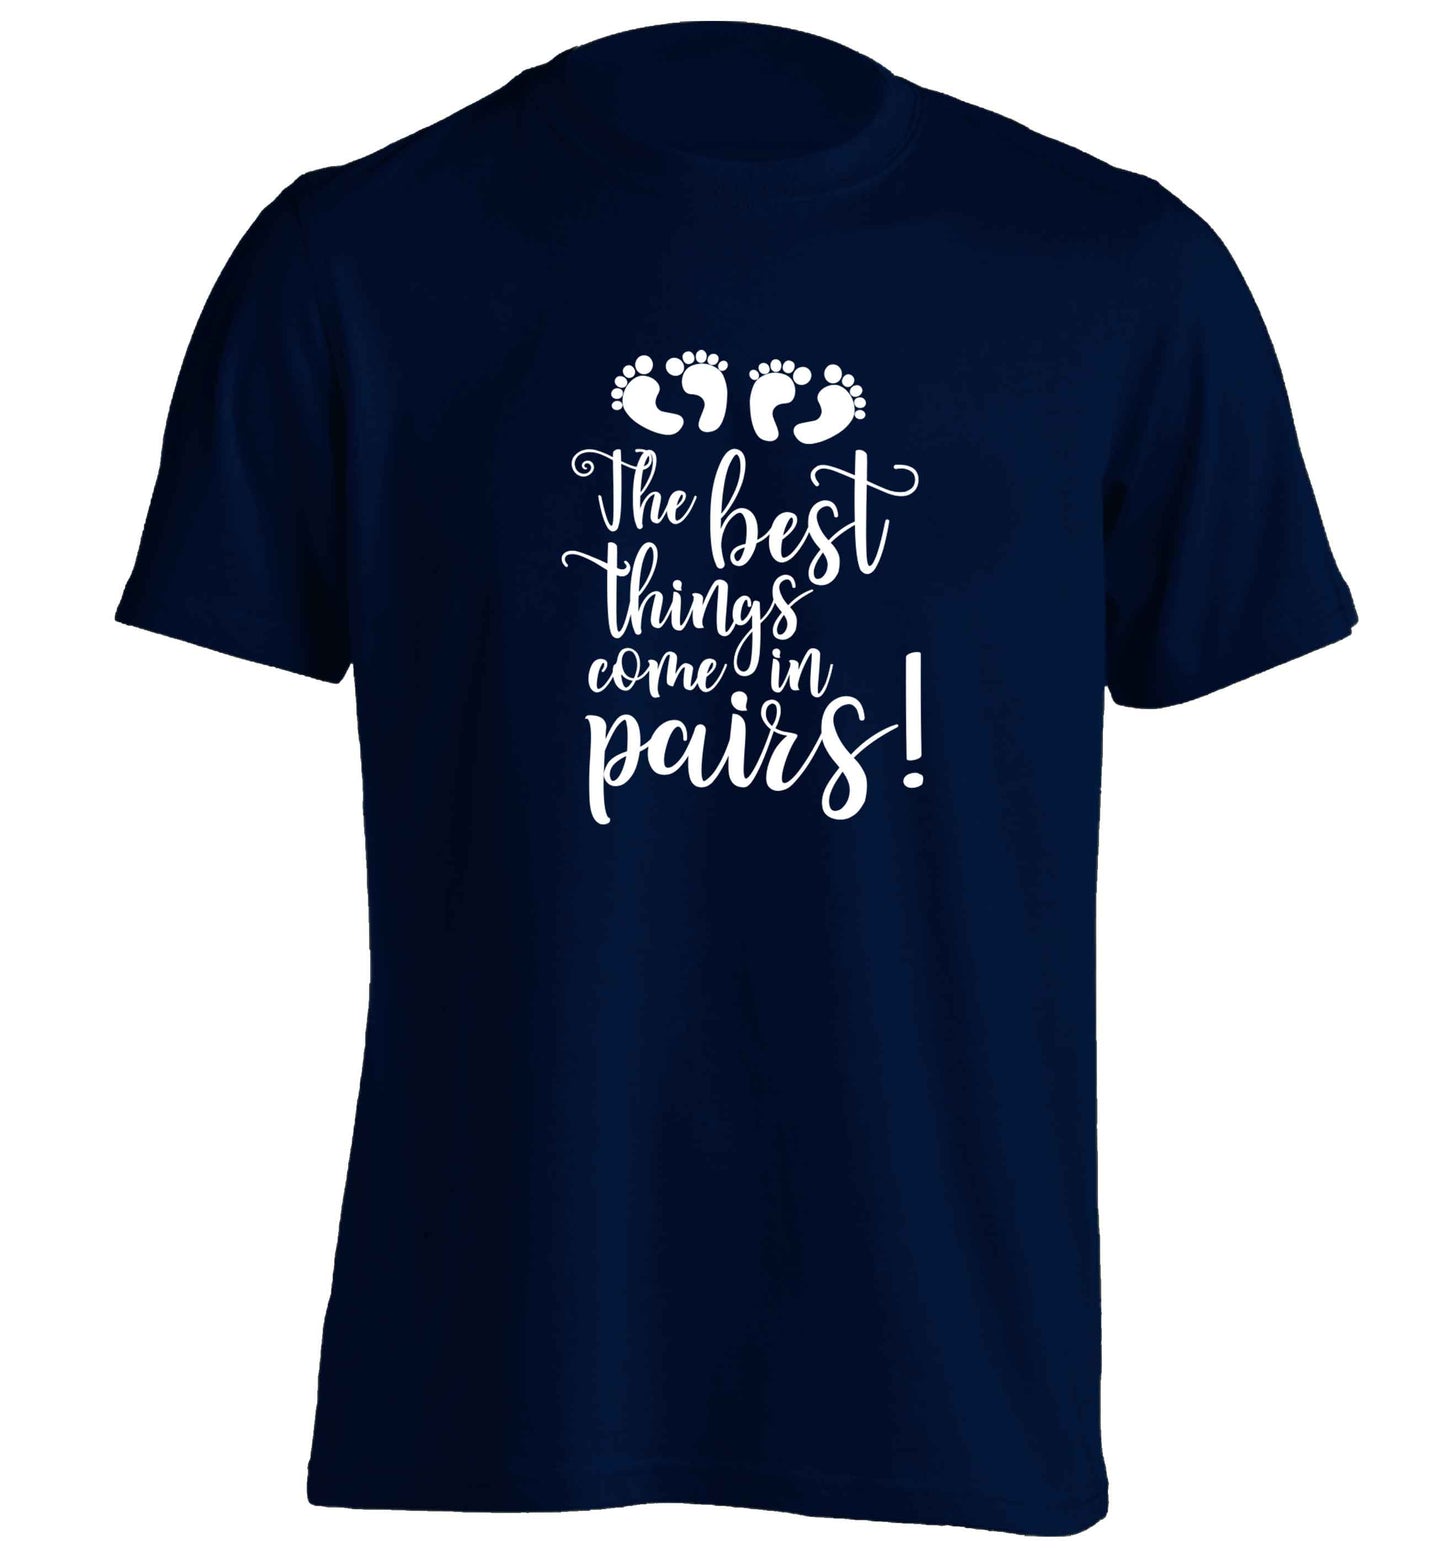 The best things come in pairs! adults unisex navy Tshirt 2XL